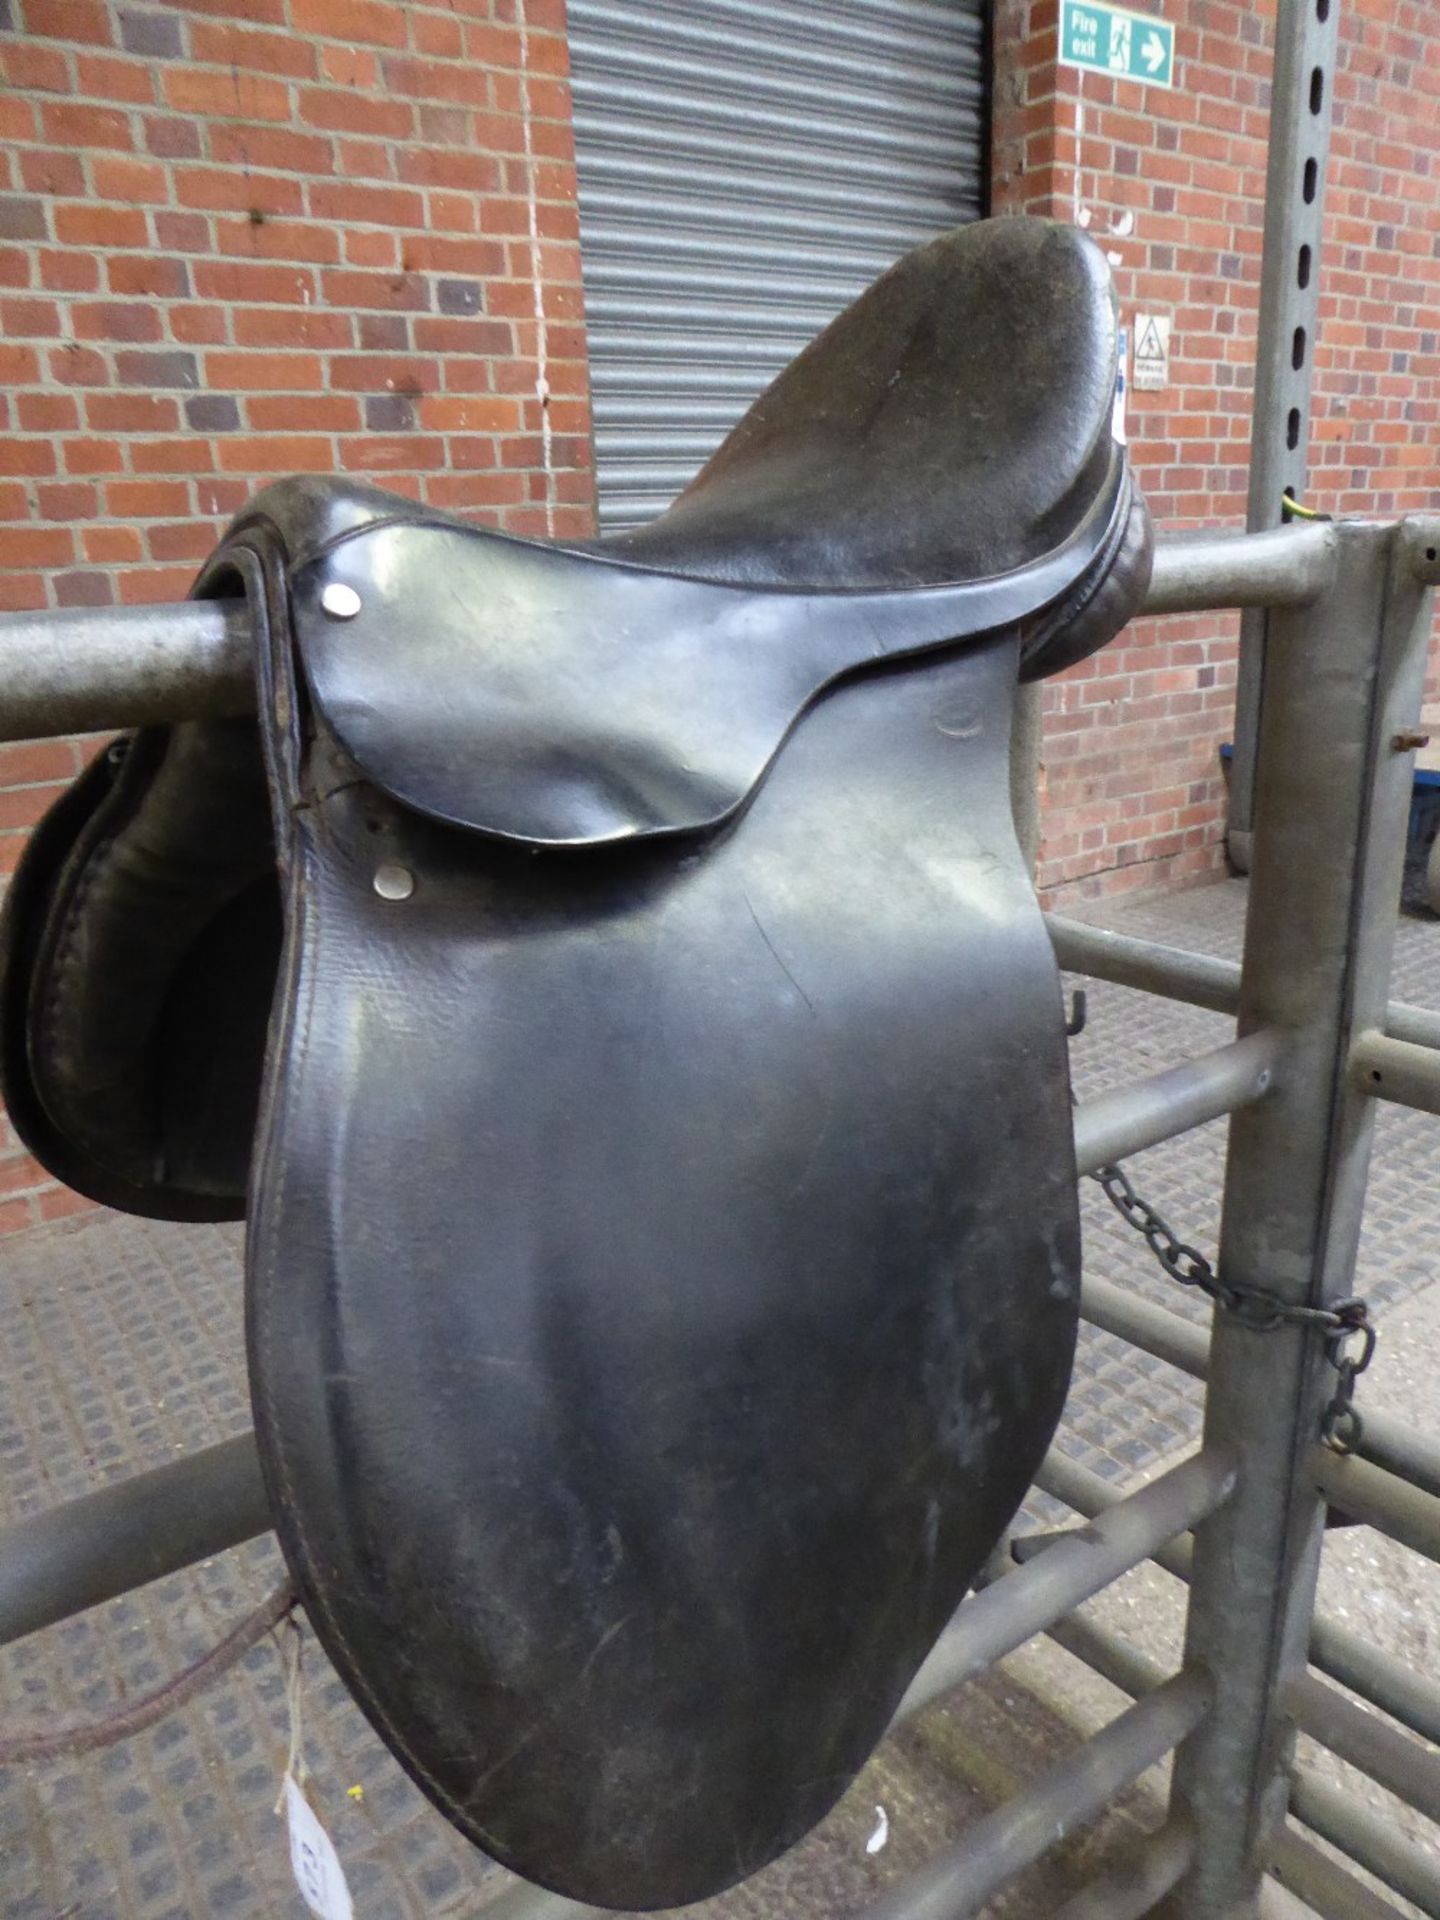 16ins black leather saddle by The Society of Master Saddlers - carries VAT.